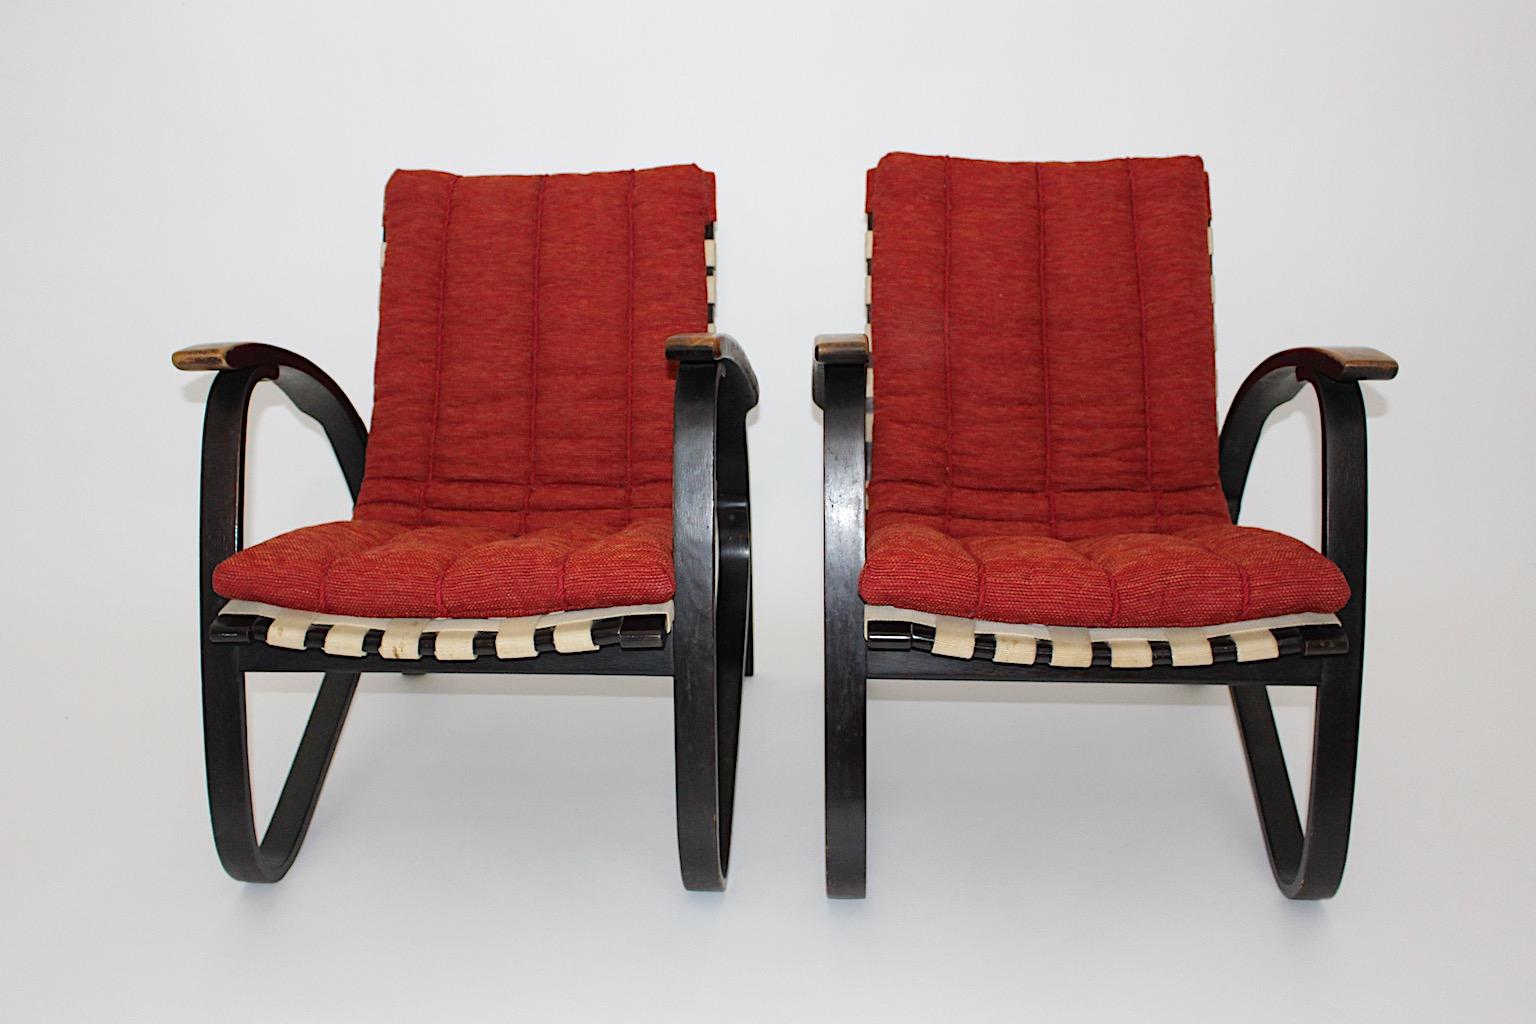 Art Deco Vintage Lounge Chairs Red Upholstery Pair Duo Jan Vanek 1940s For Sale 2